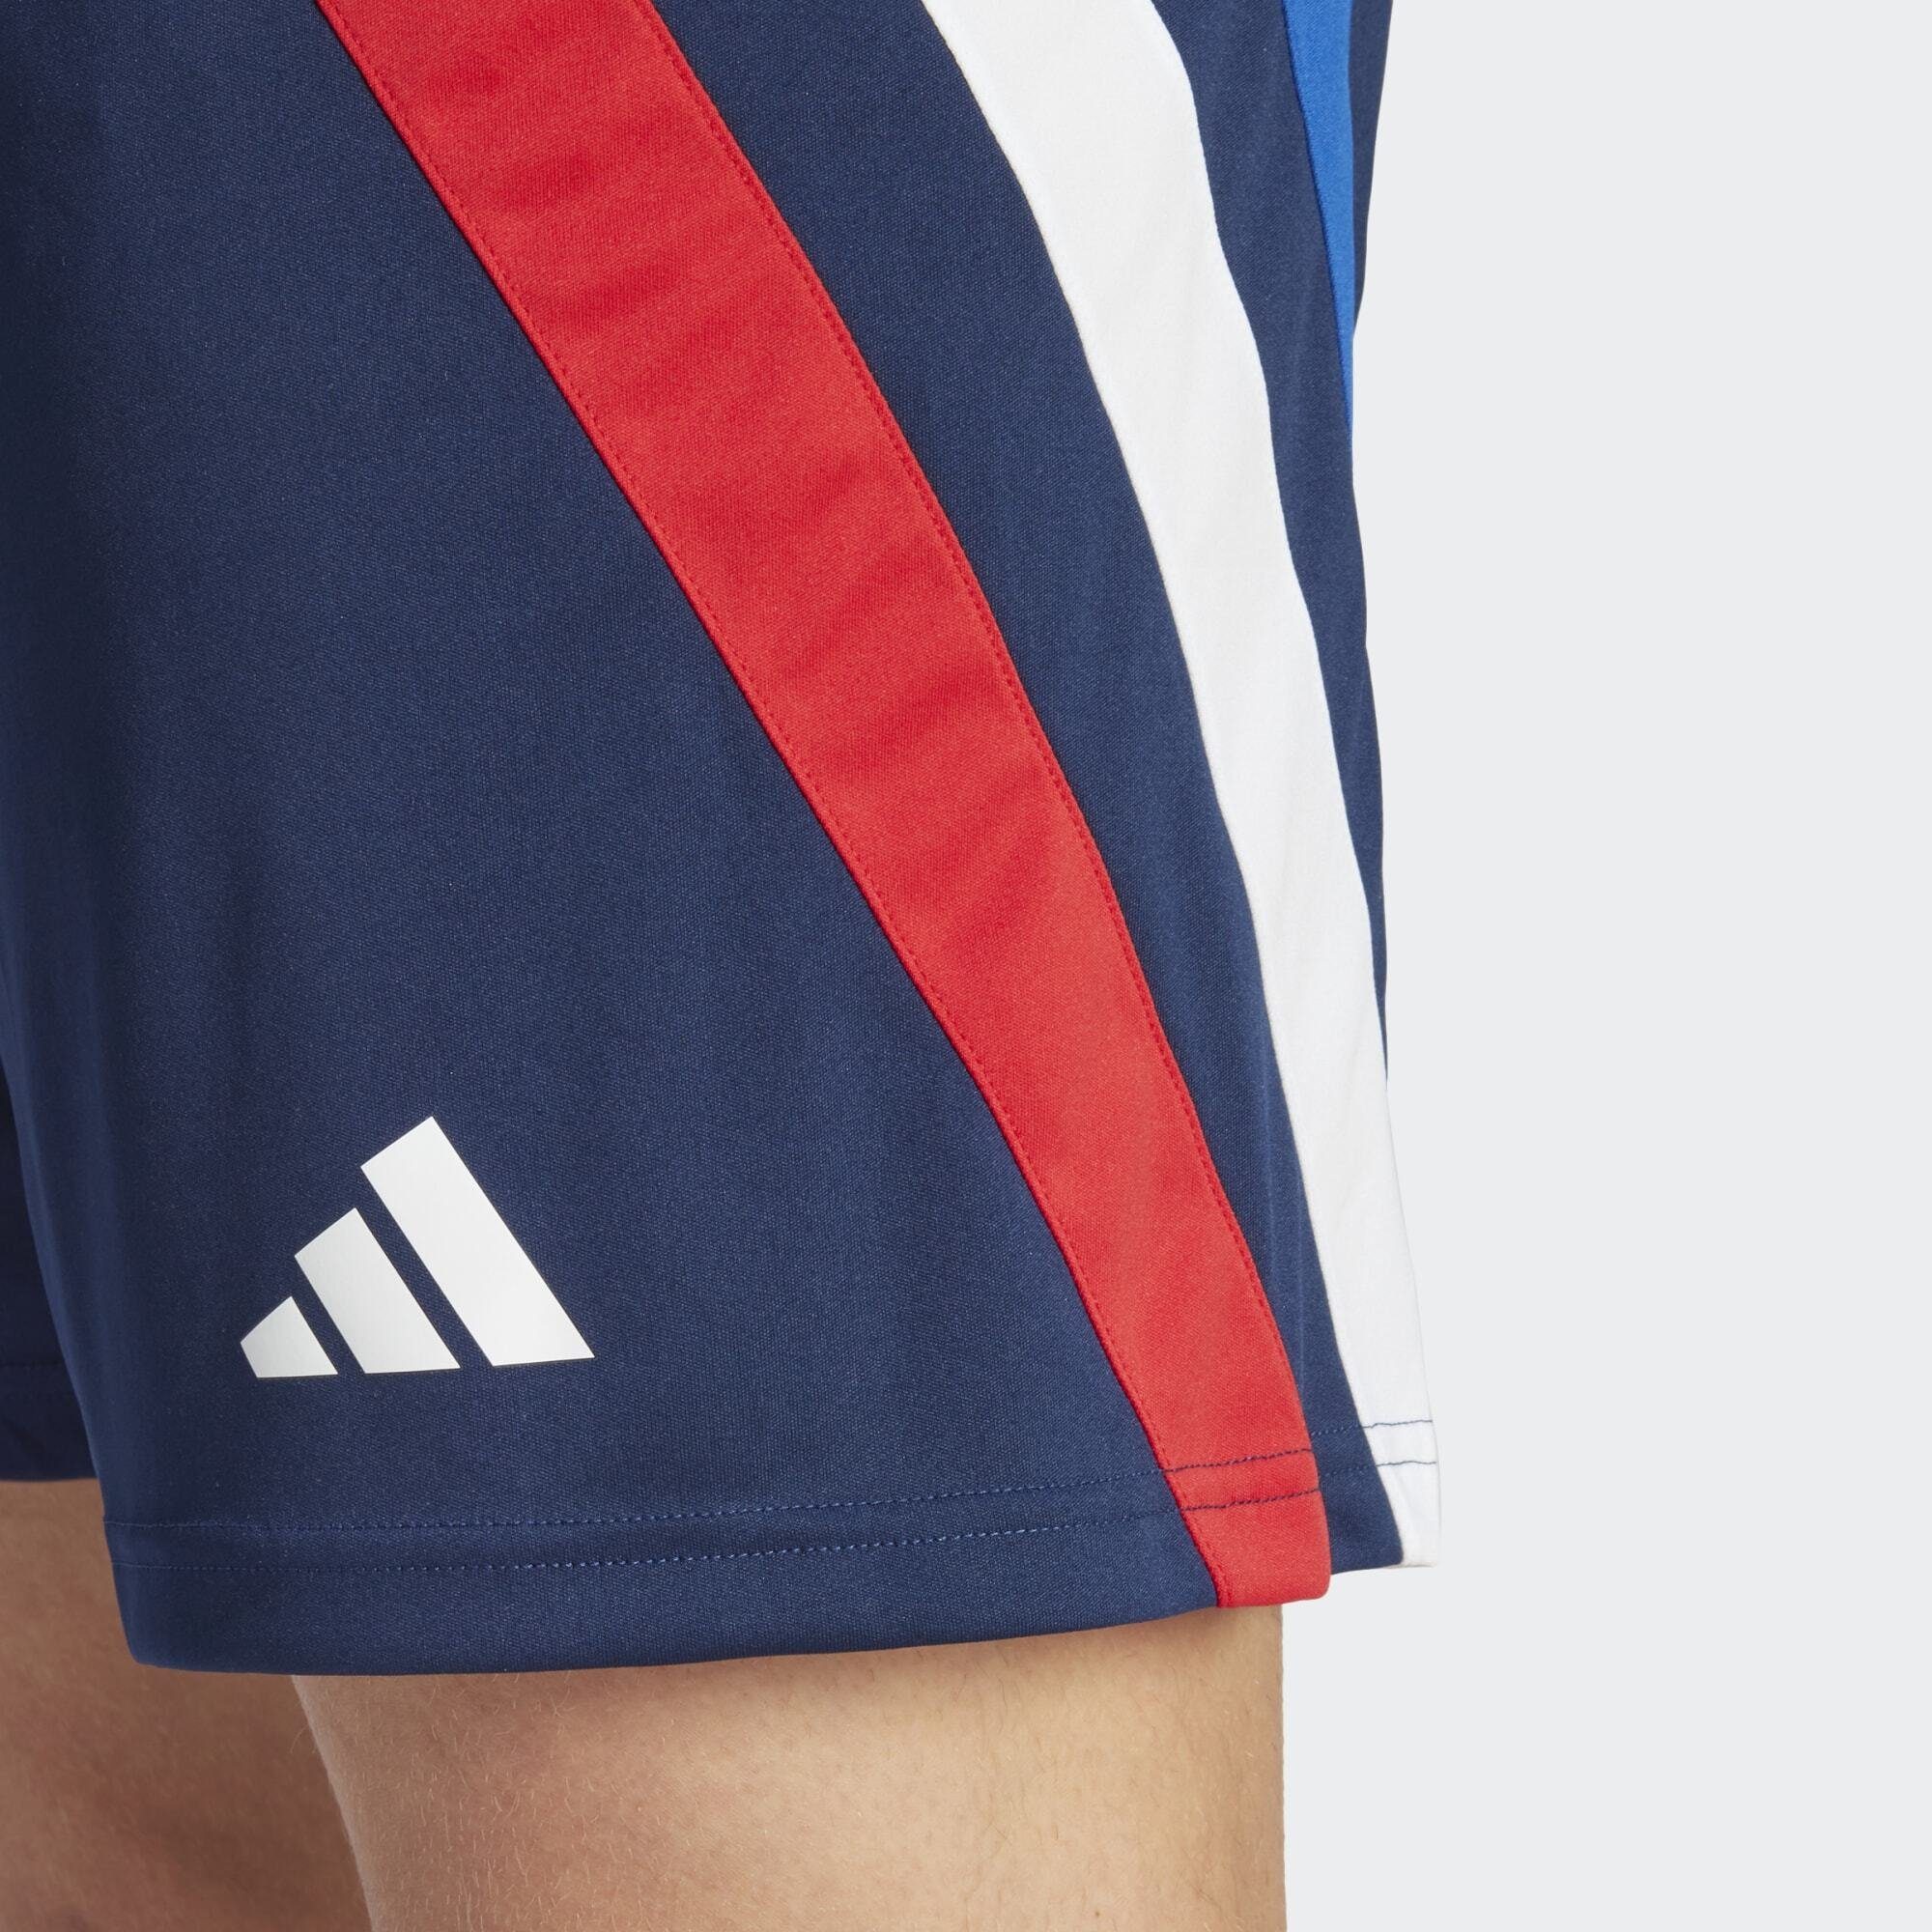 / Royal Blue / Team Navy adidas 23 Funktionsshorts 2 White SHORTS FORTORE Blue Team Red Performance Collegiate /